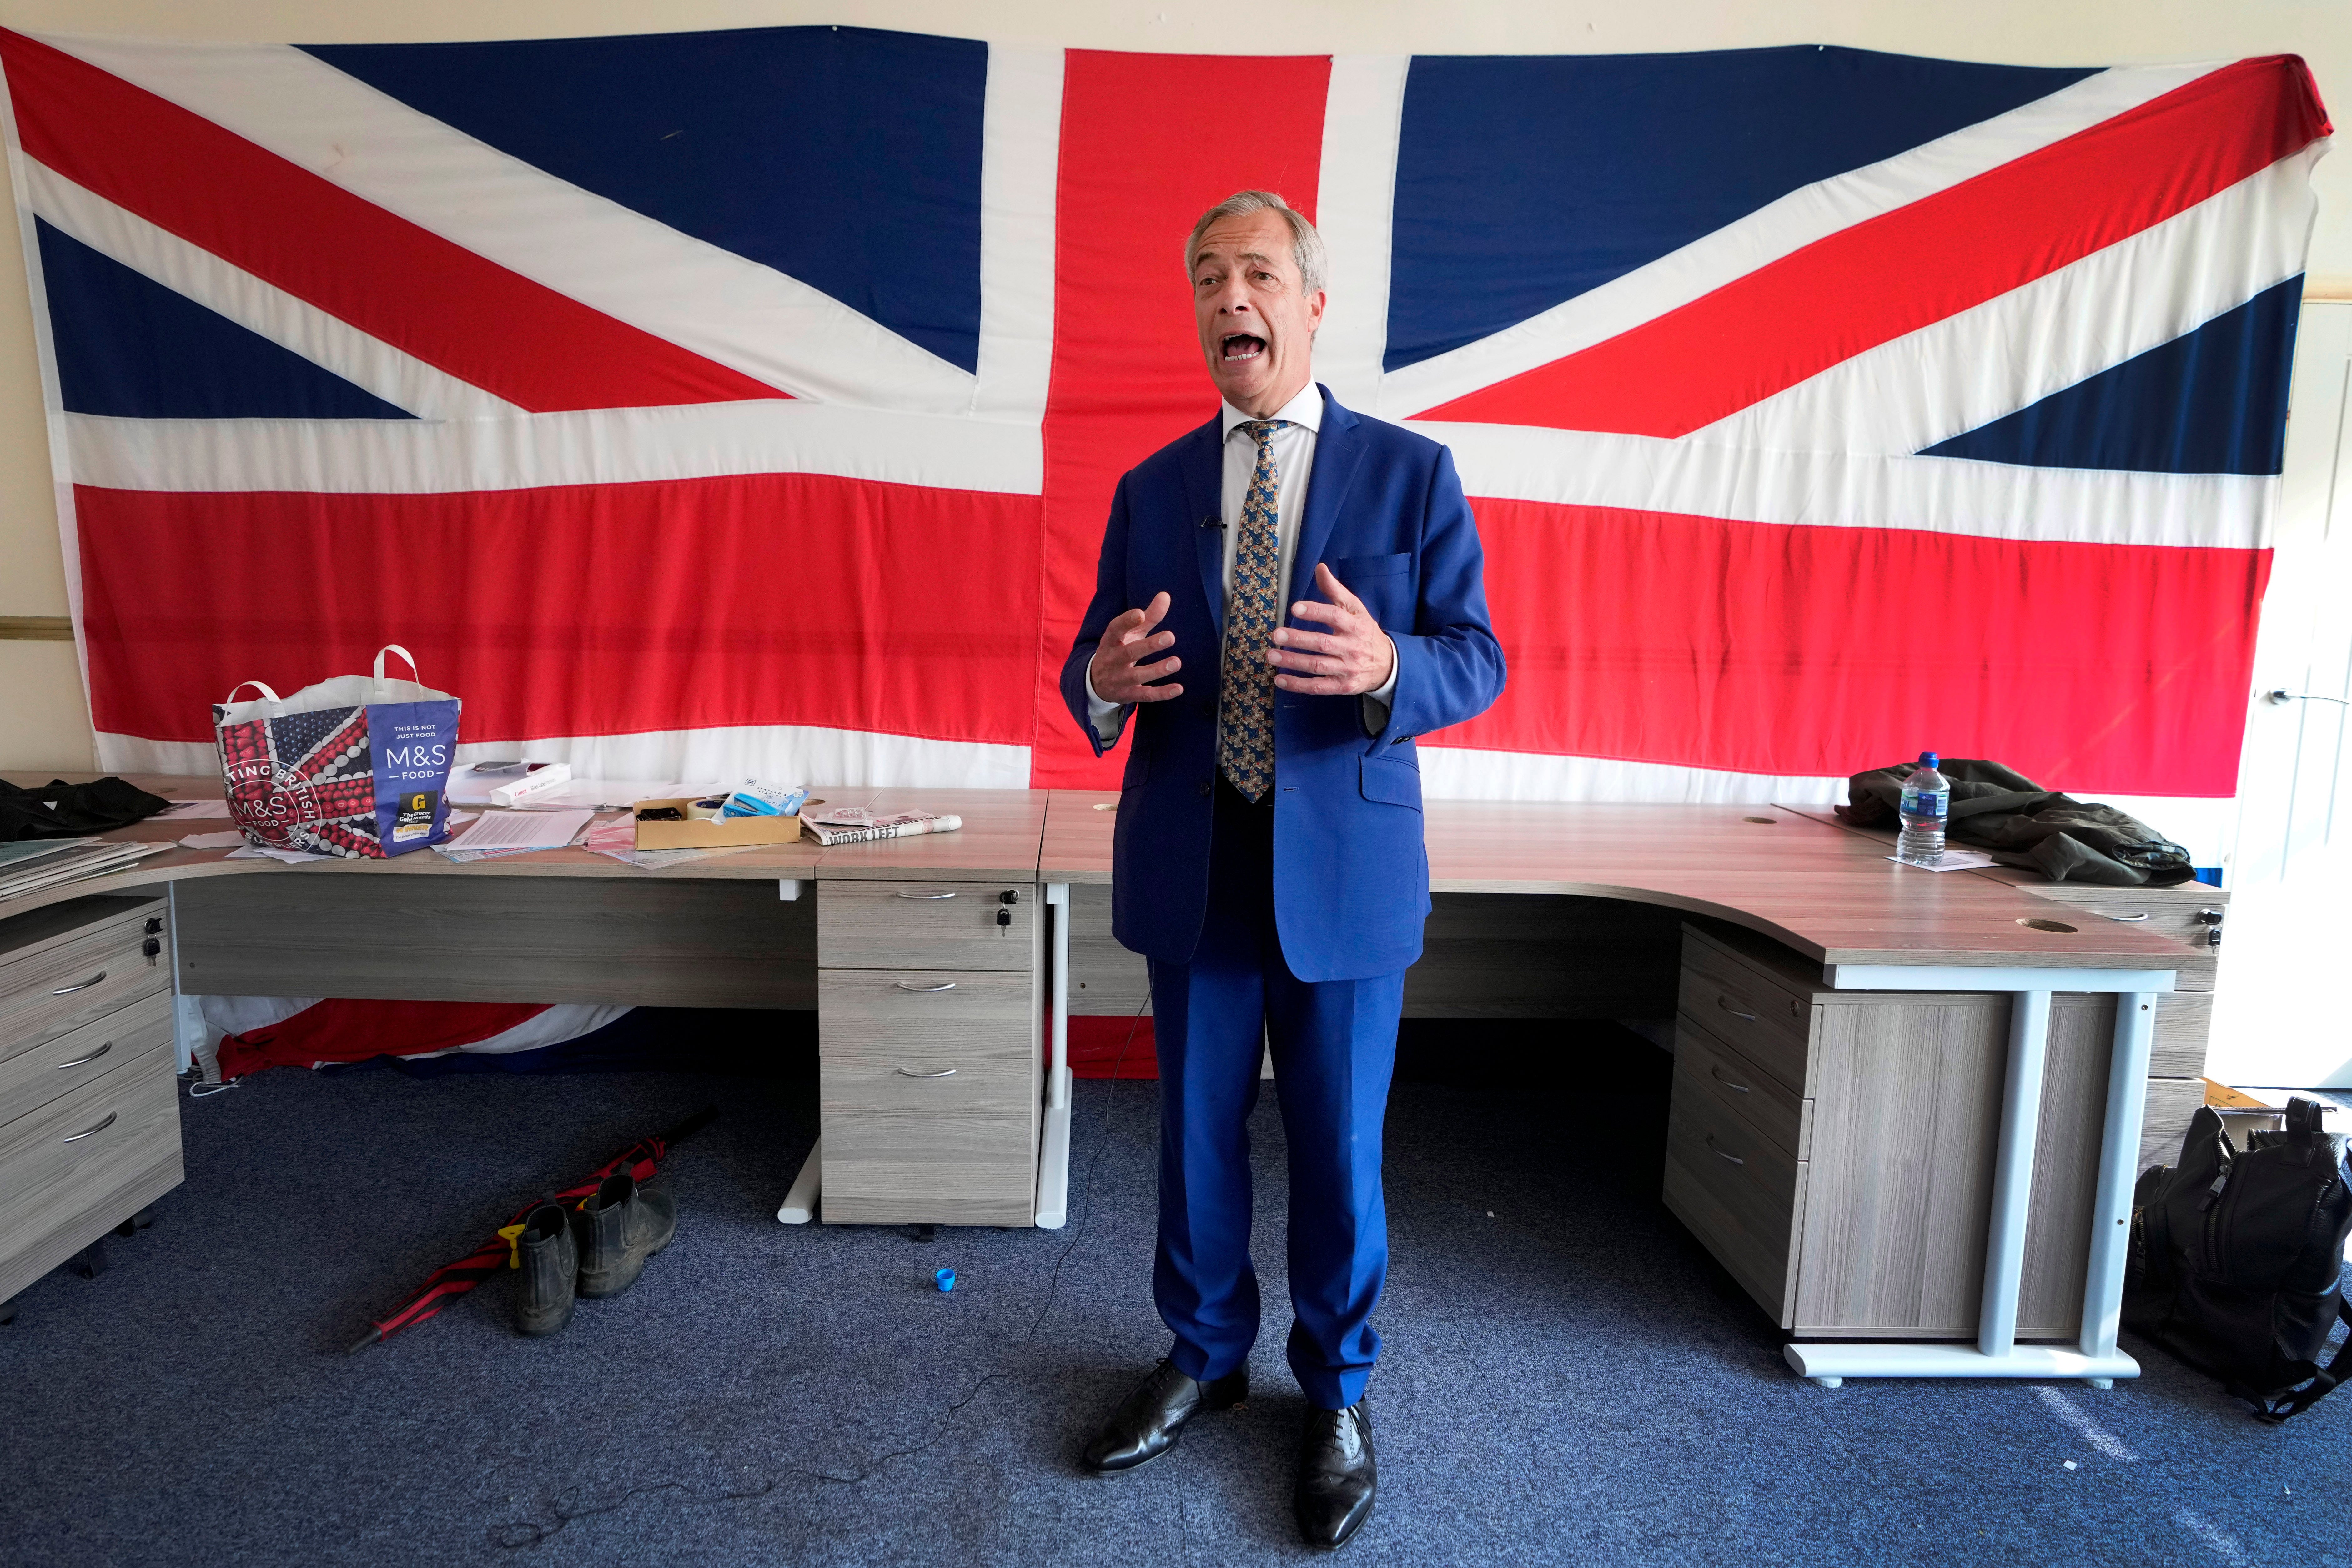 Nigel Farage claimed Reform’s ‘bad apples’ have been rooted out